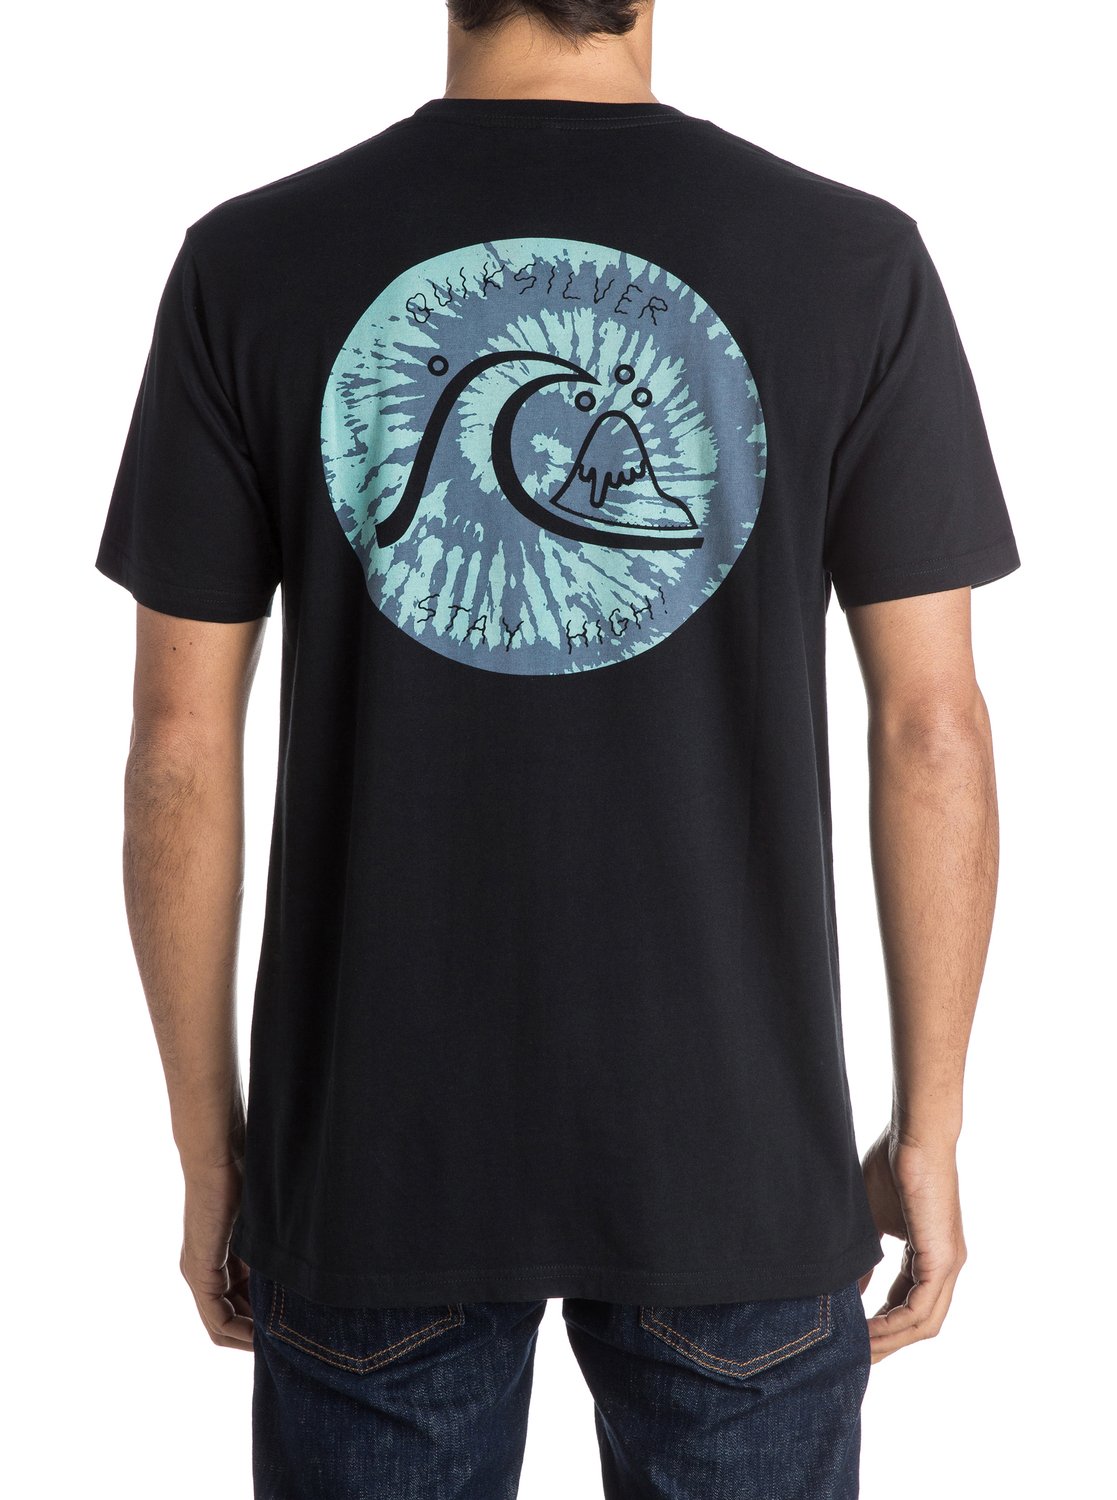 AM Life'S A Trip Tee EQYZT03967 | Quiksilver